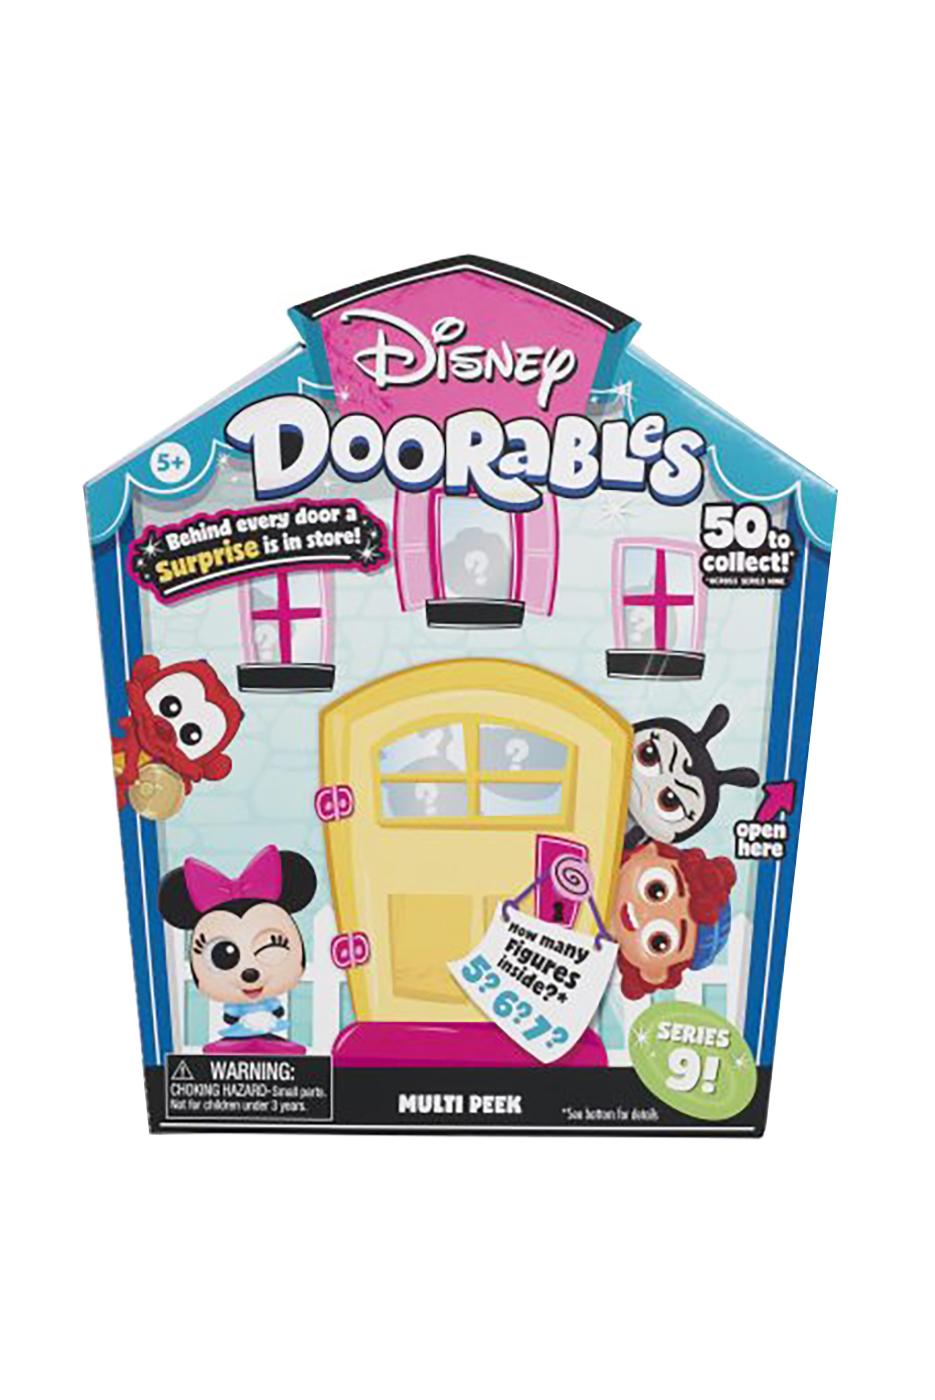 Just Play Disney Doorables Stitch Collection Peek - Shop Action Figures &  Dolls at H-E-B